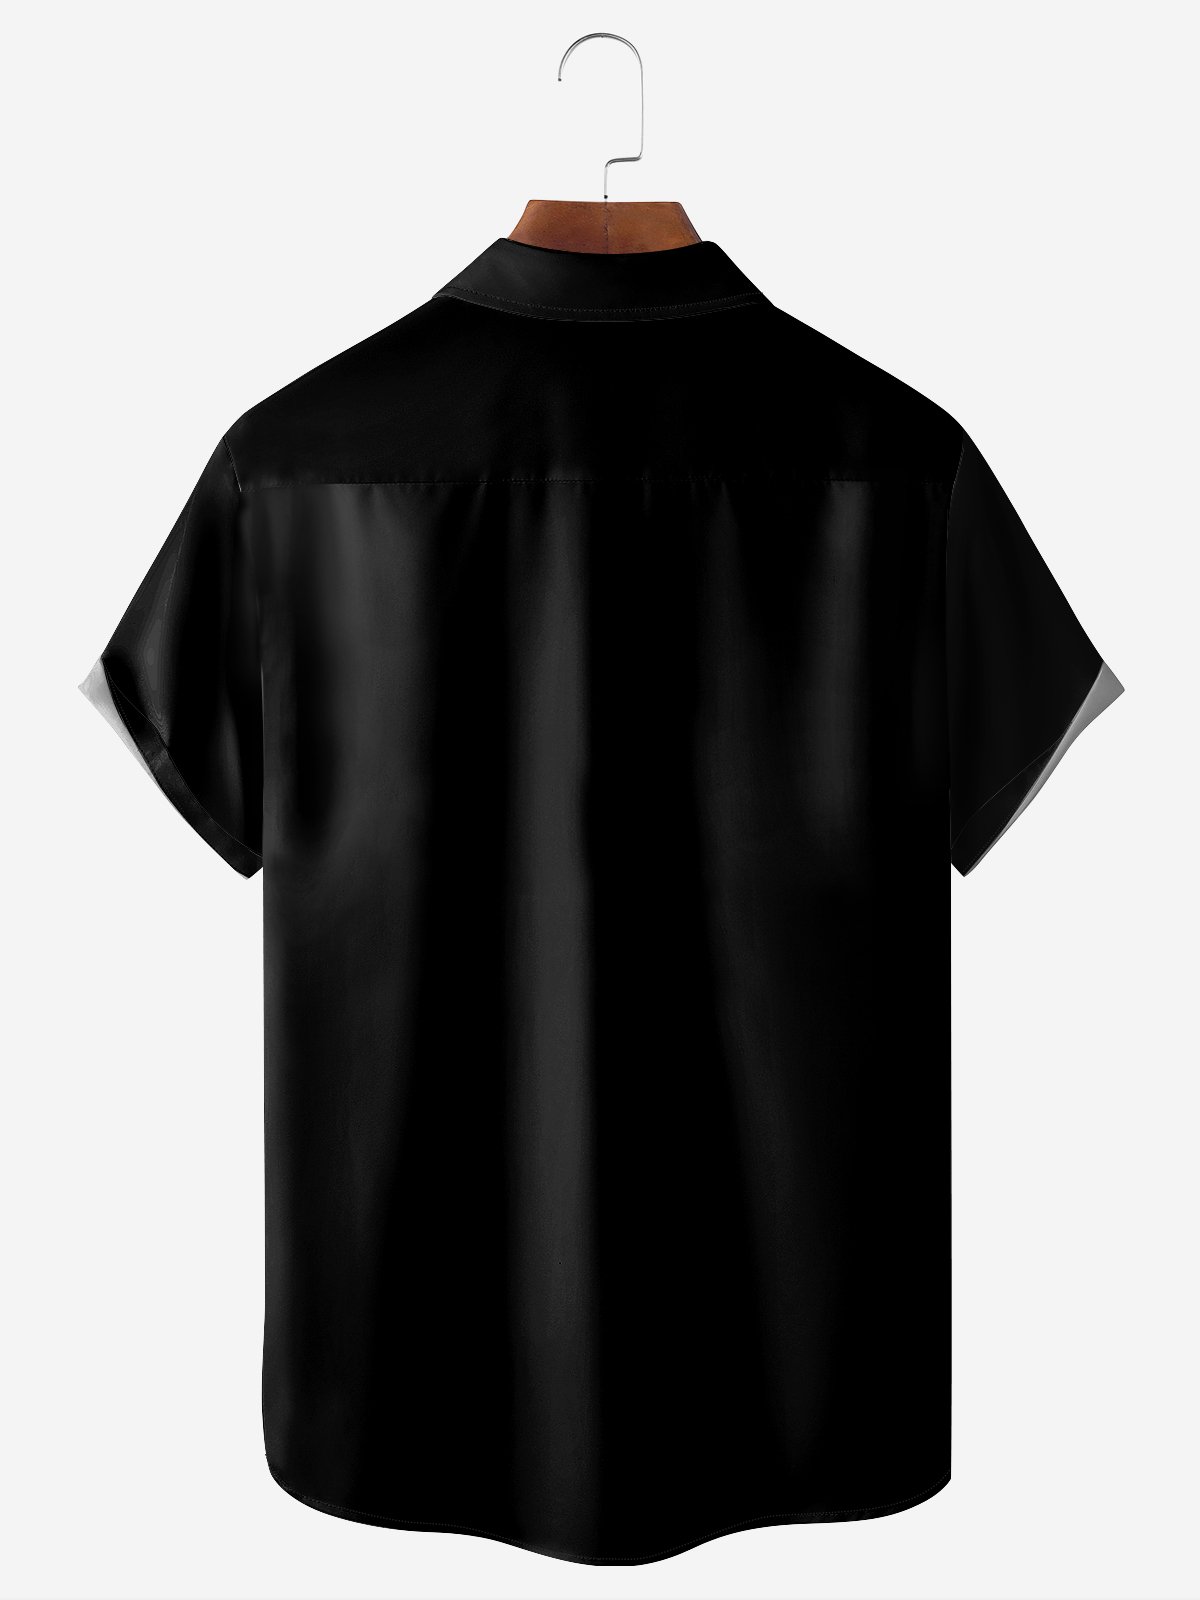 Breathable Memorial Day “Faith Over Fear” Chest Pocket Bowling Shirt